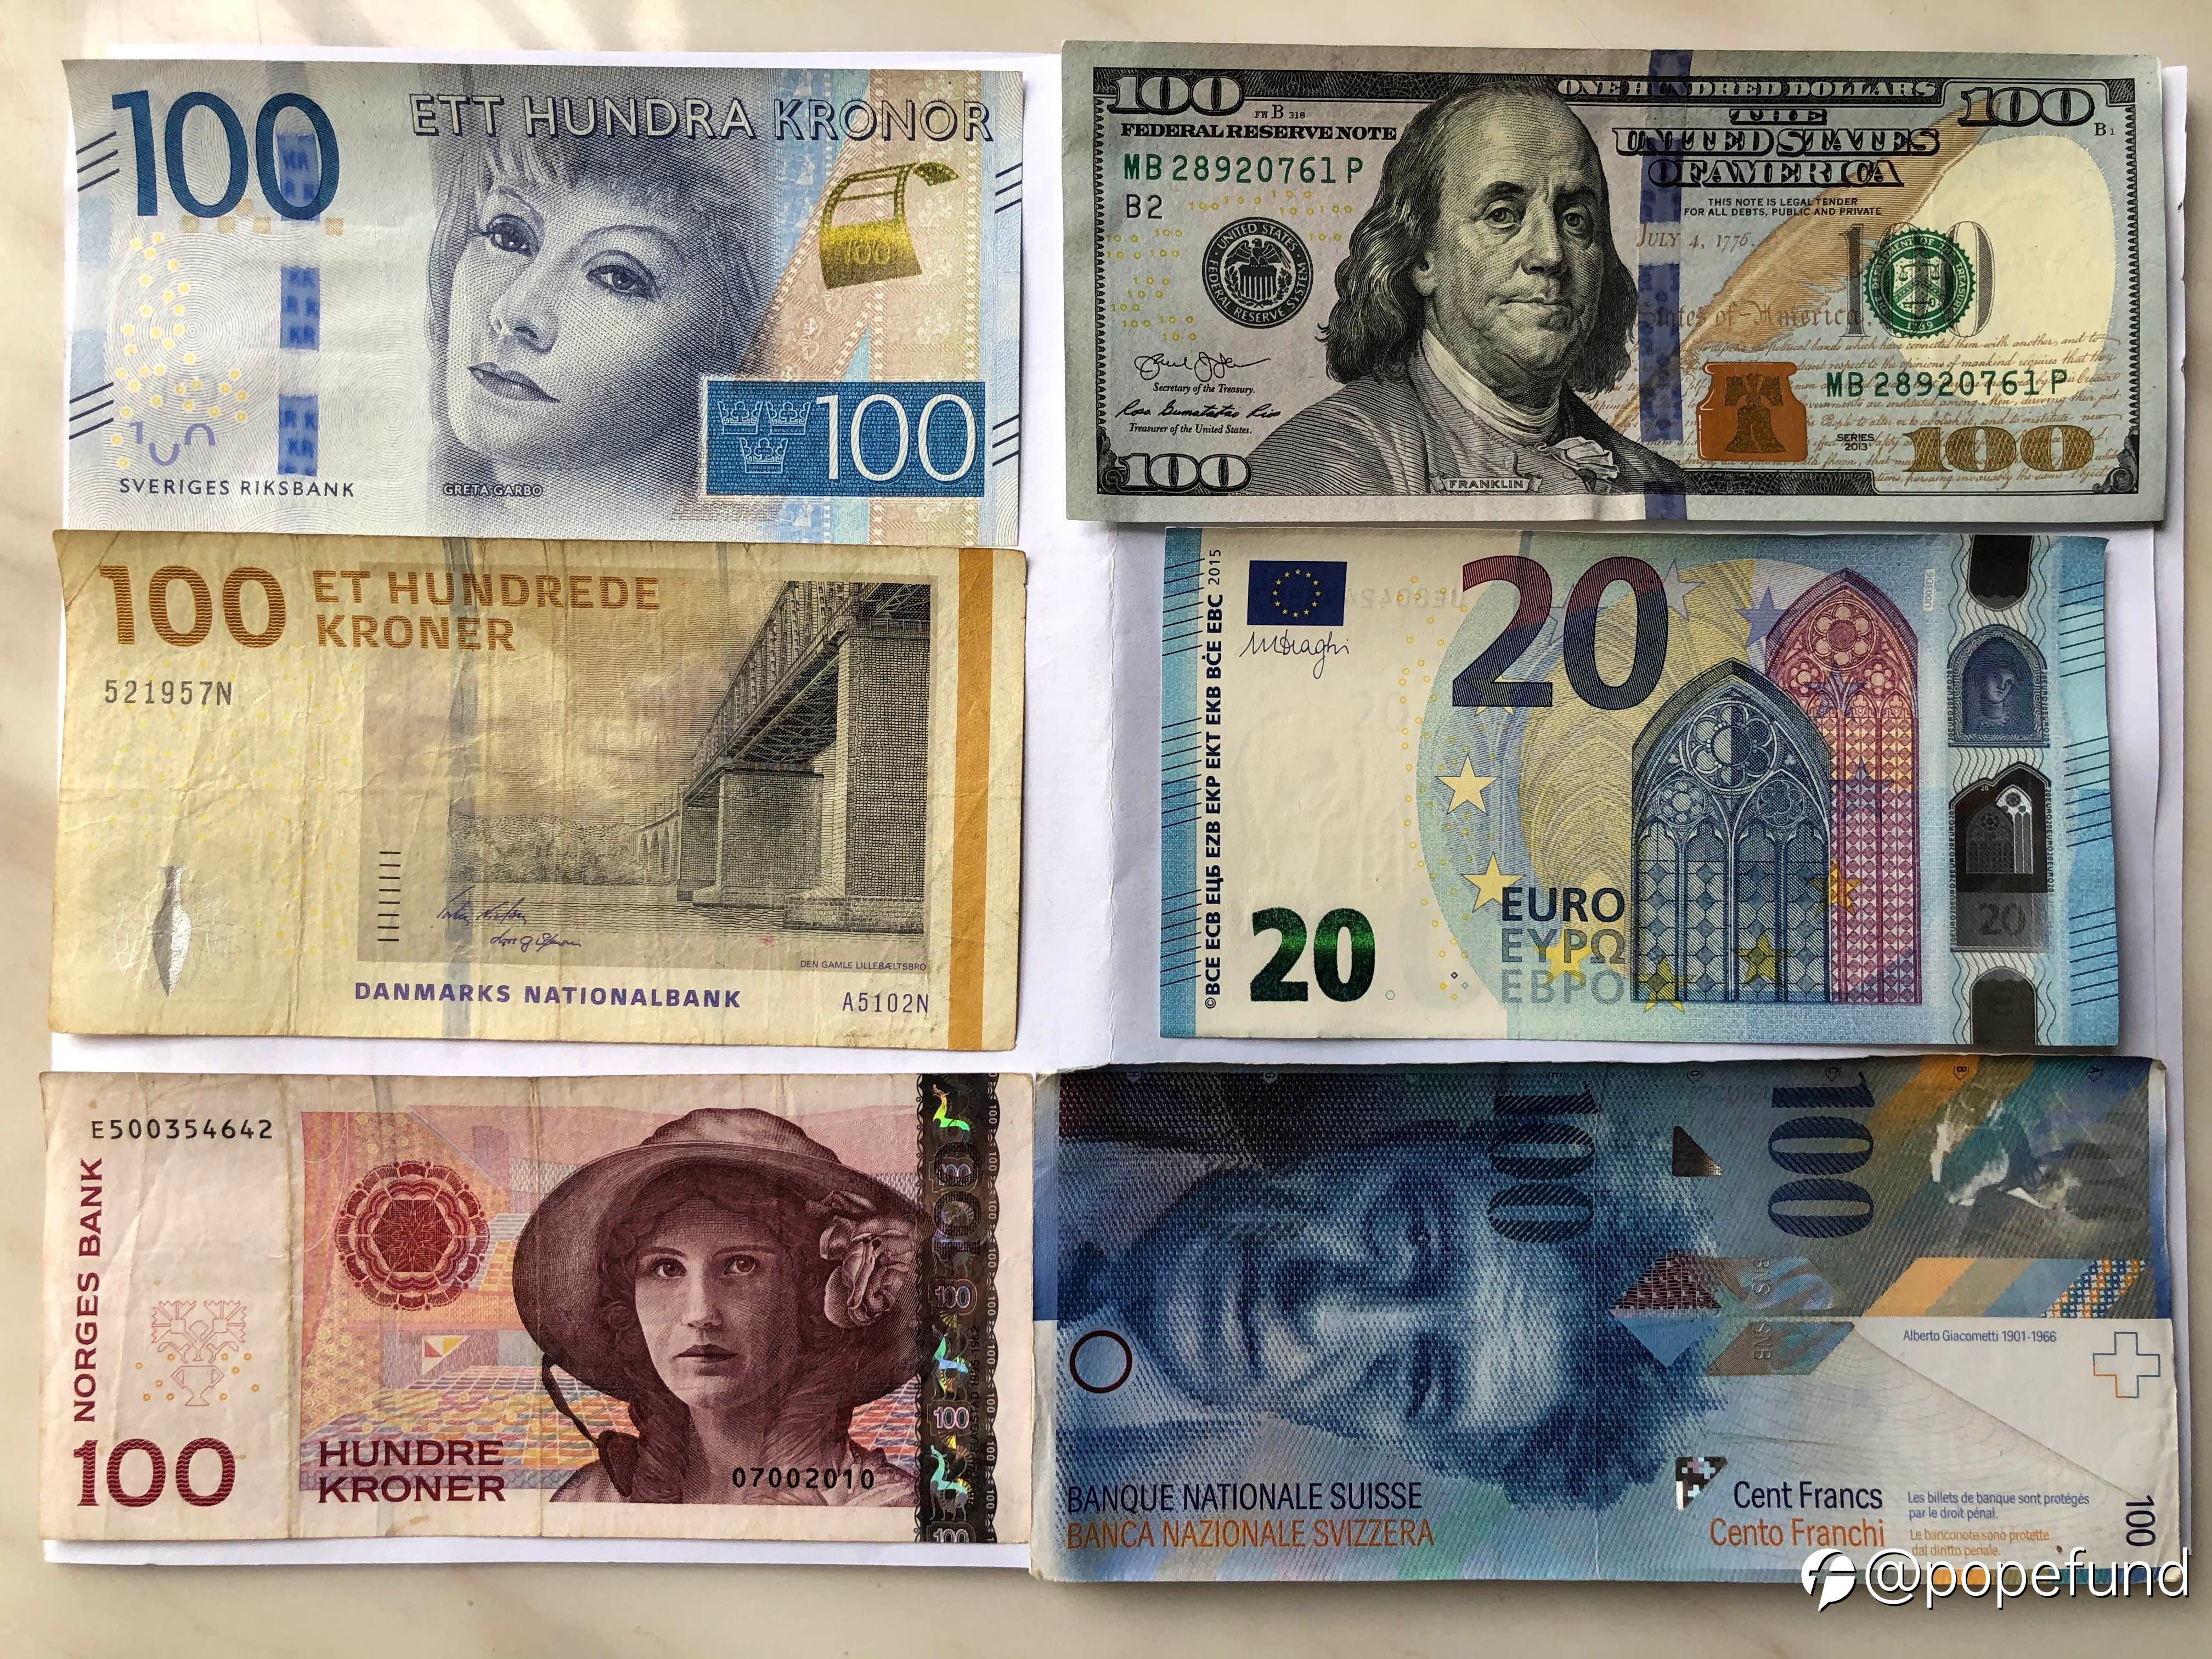 They are much more interesting than just trading: beautiful ,commemorative and artistic bank notes